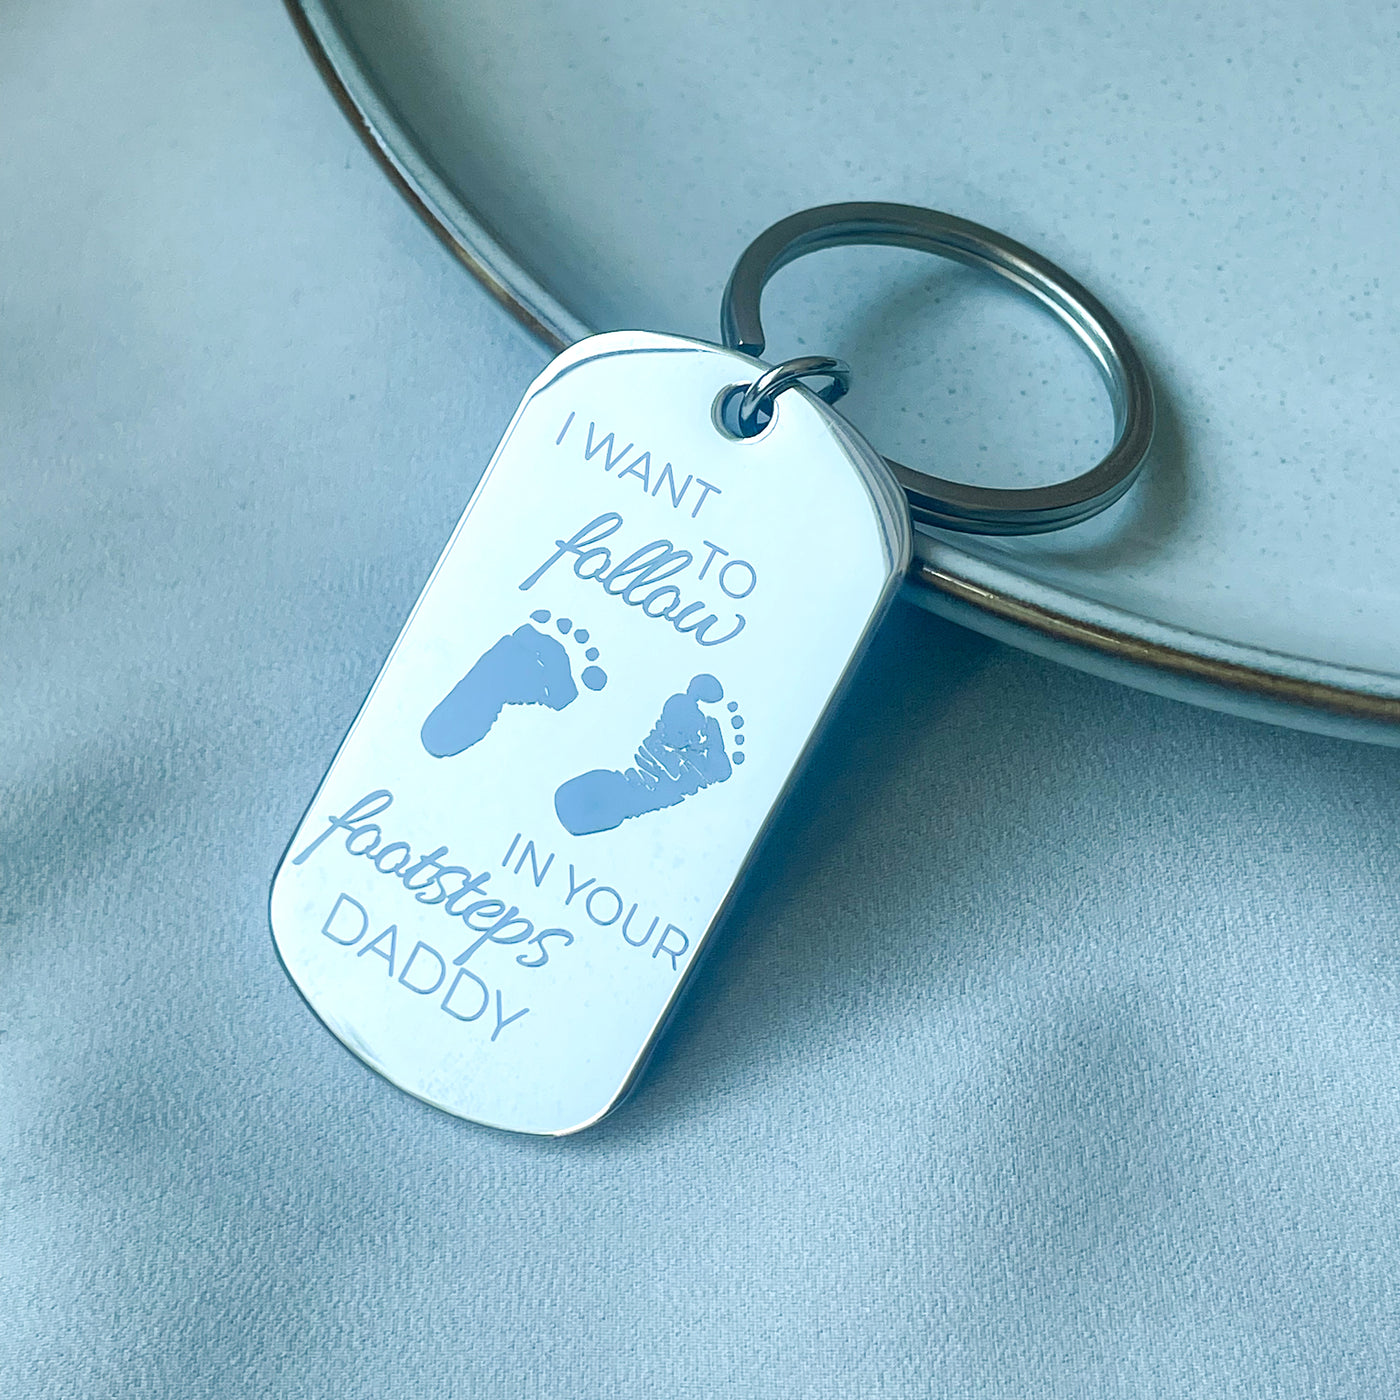 KEYCHAIN - "I WANT TO FOLLOW IN YOUR FOOTSTEPS"